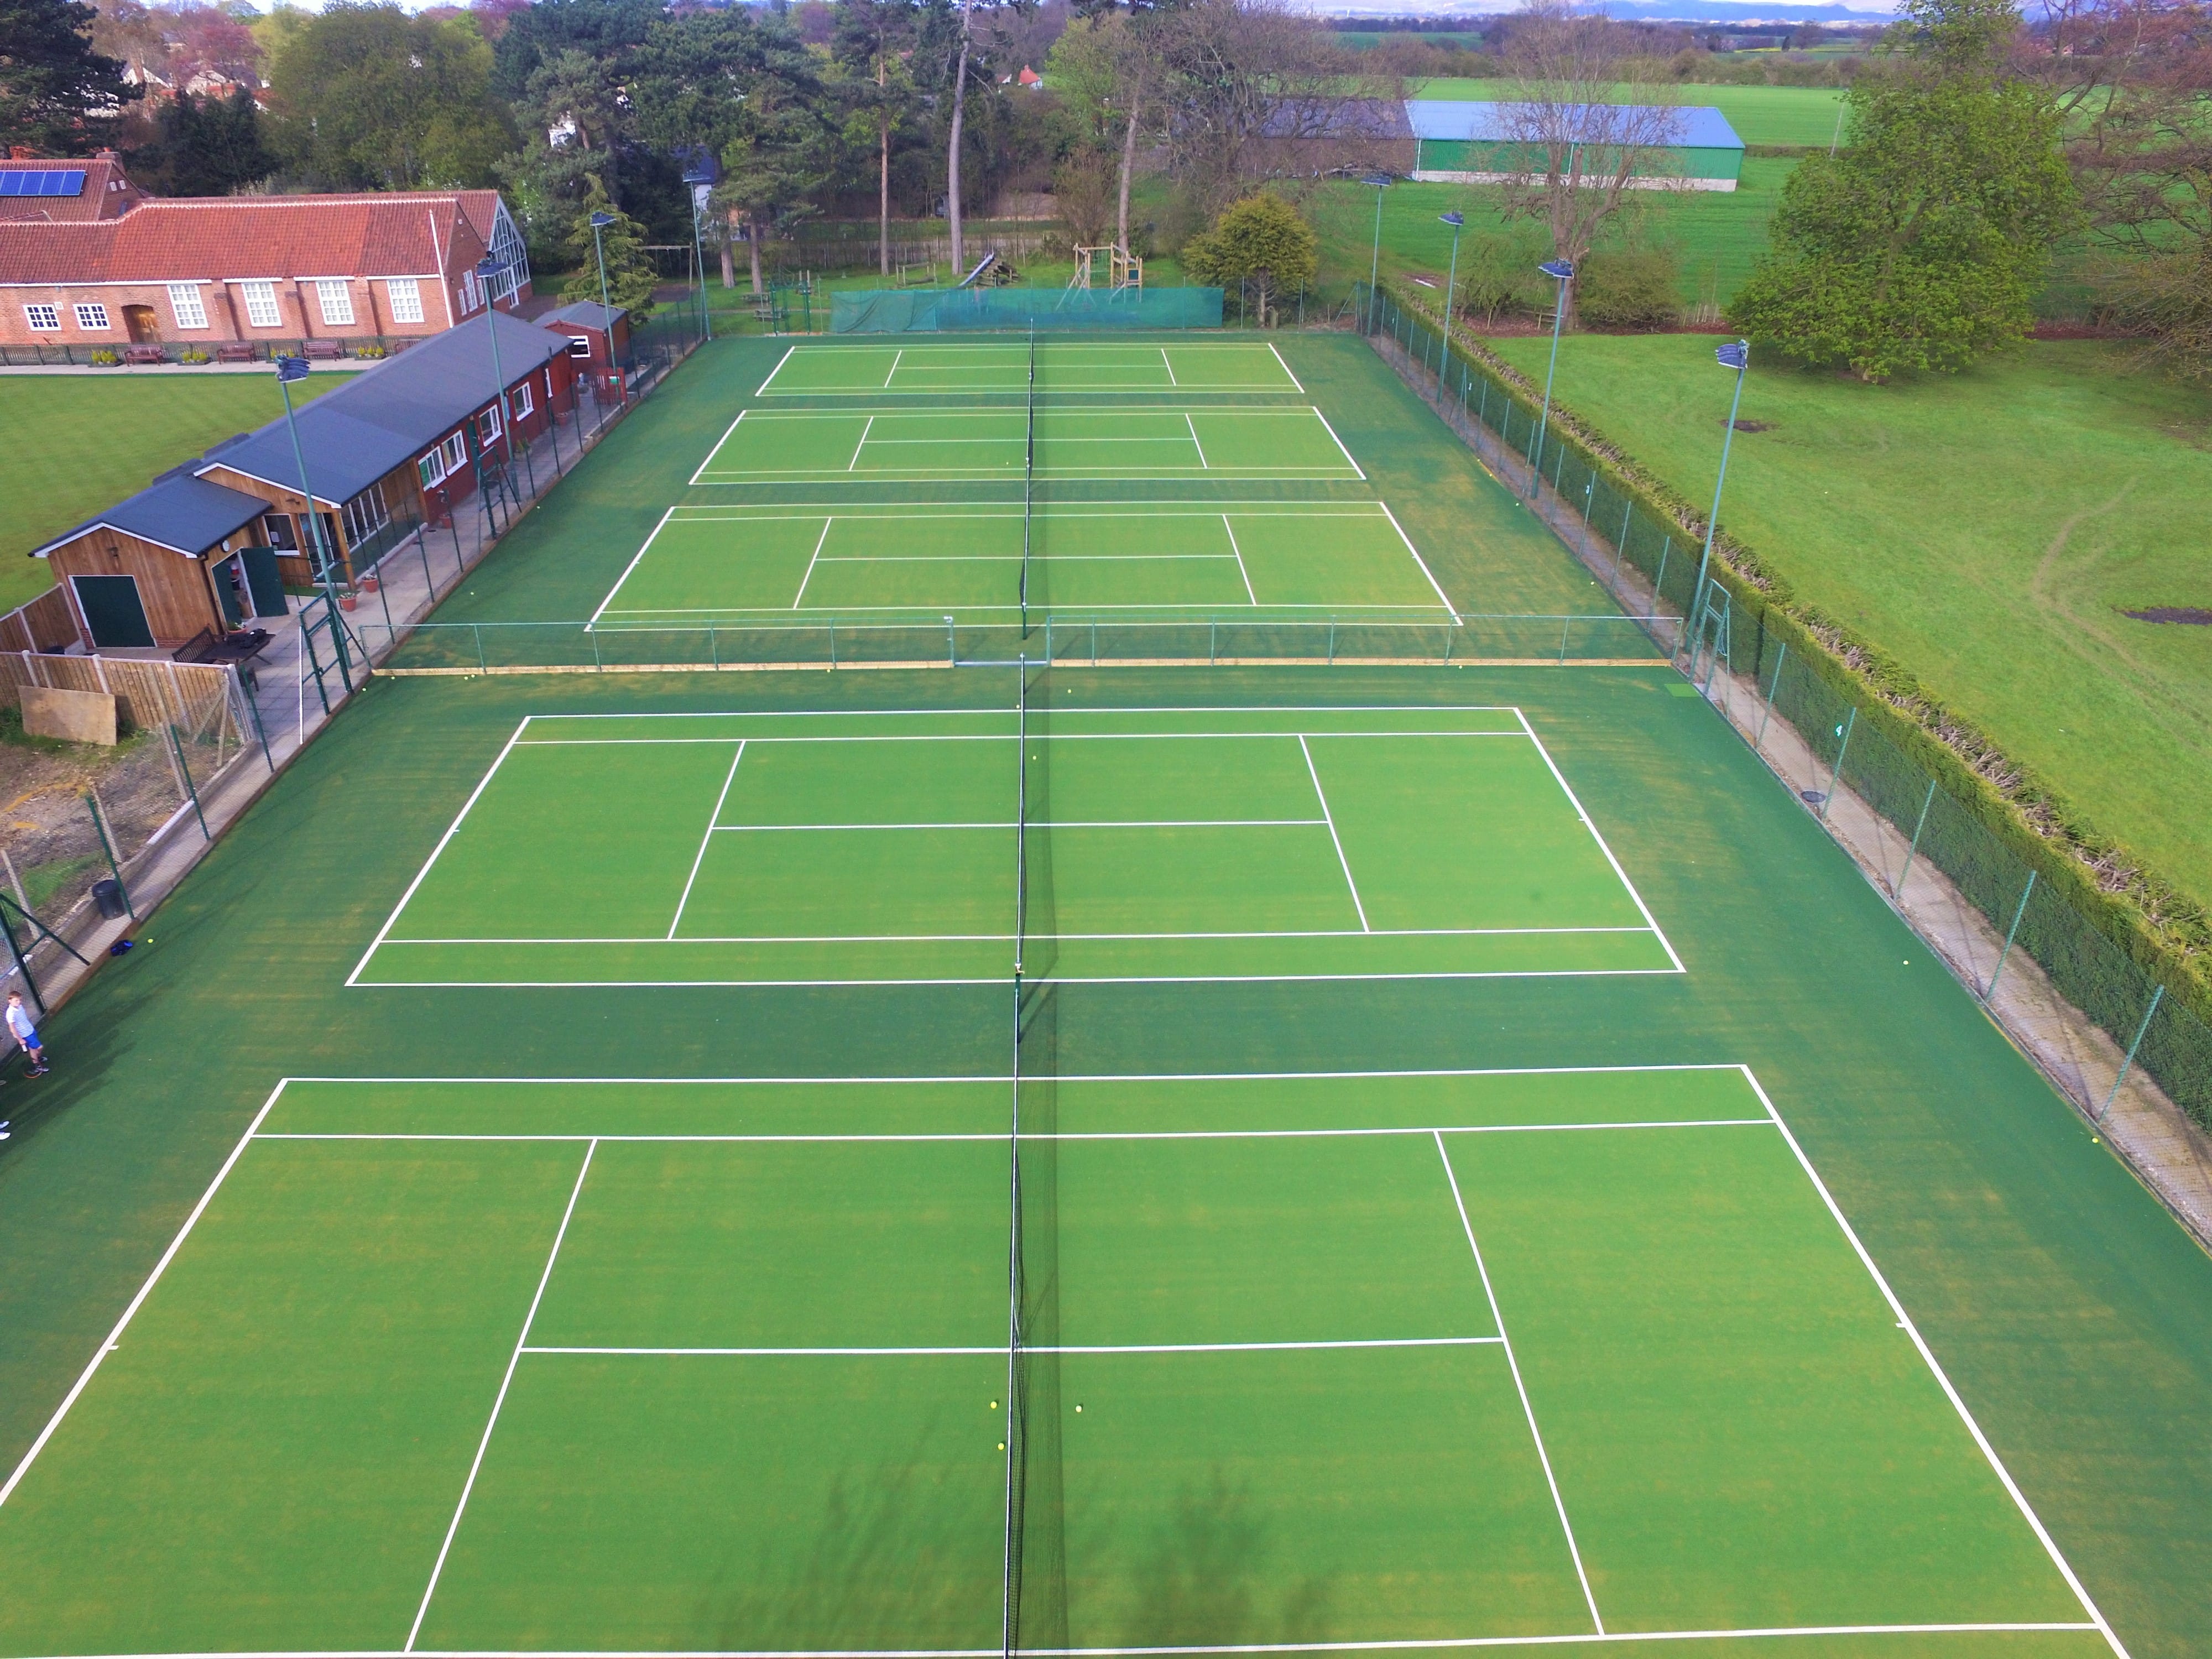 five synthetic turf green tennis courts